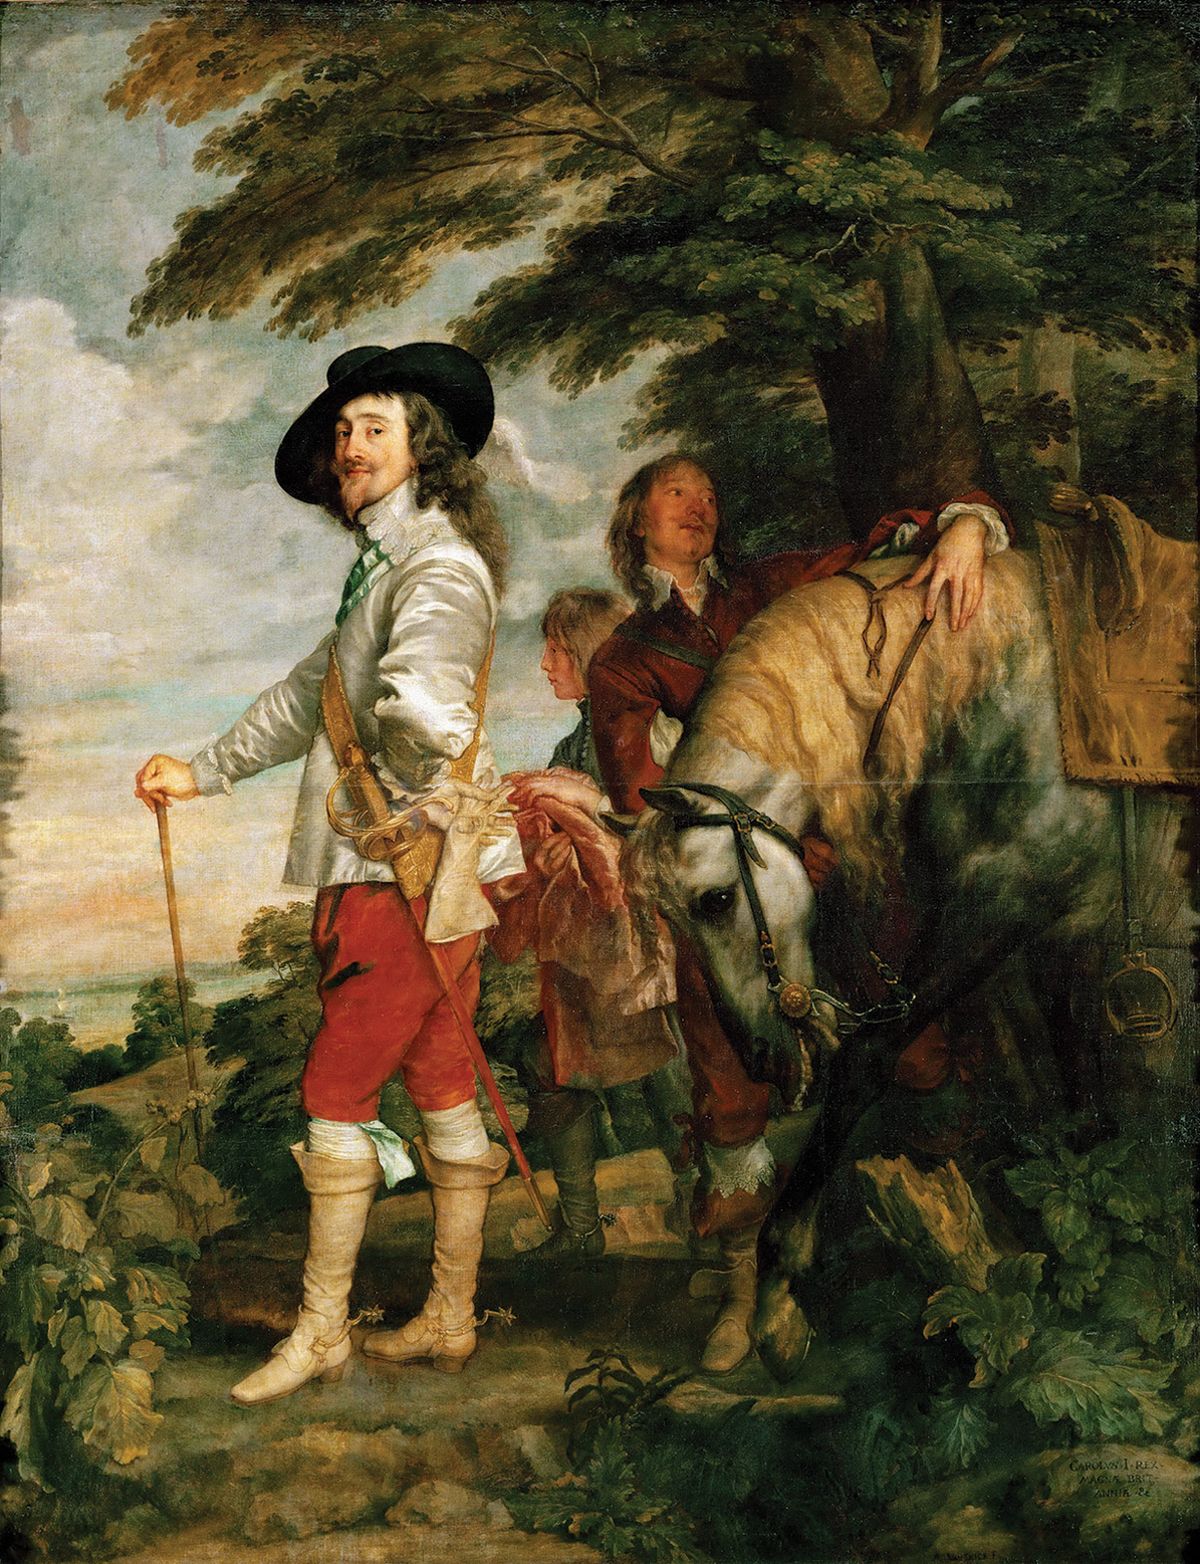 “The most romantic image of the king that exists”: Anthony van Dyck, Charles I in the Hunting-Field (around 1636) Courtesy of the Musée du Louvre, Paris